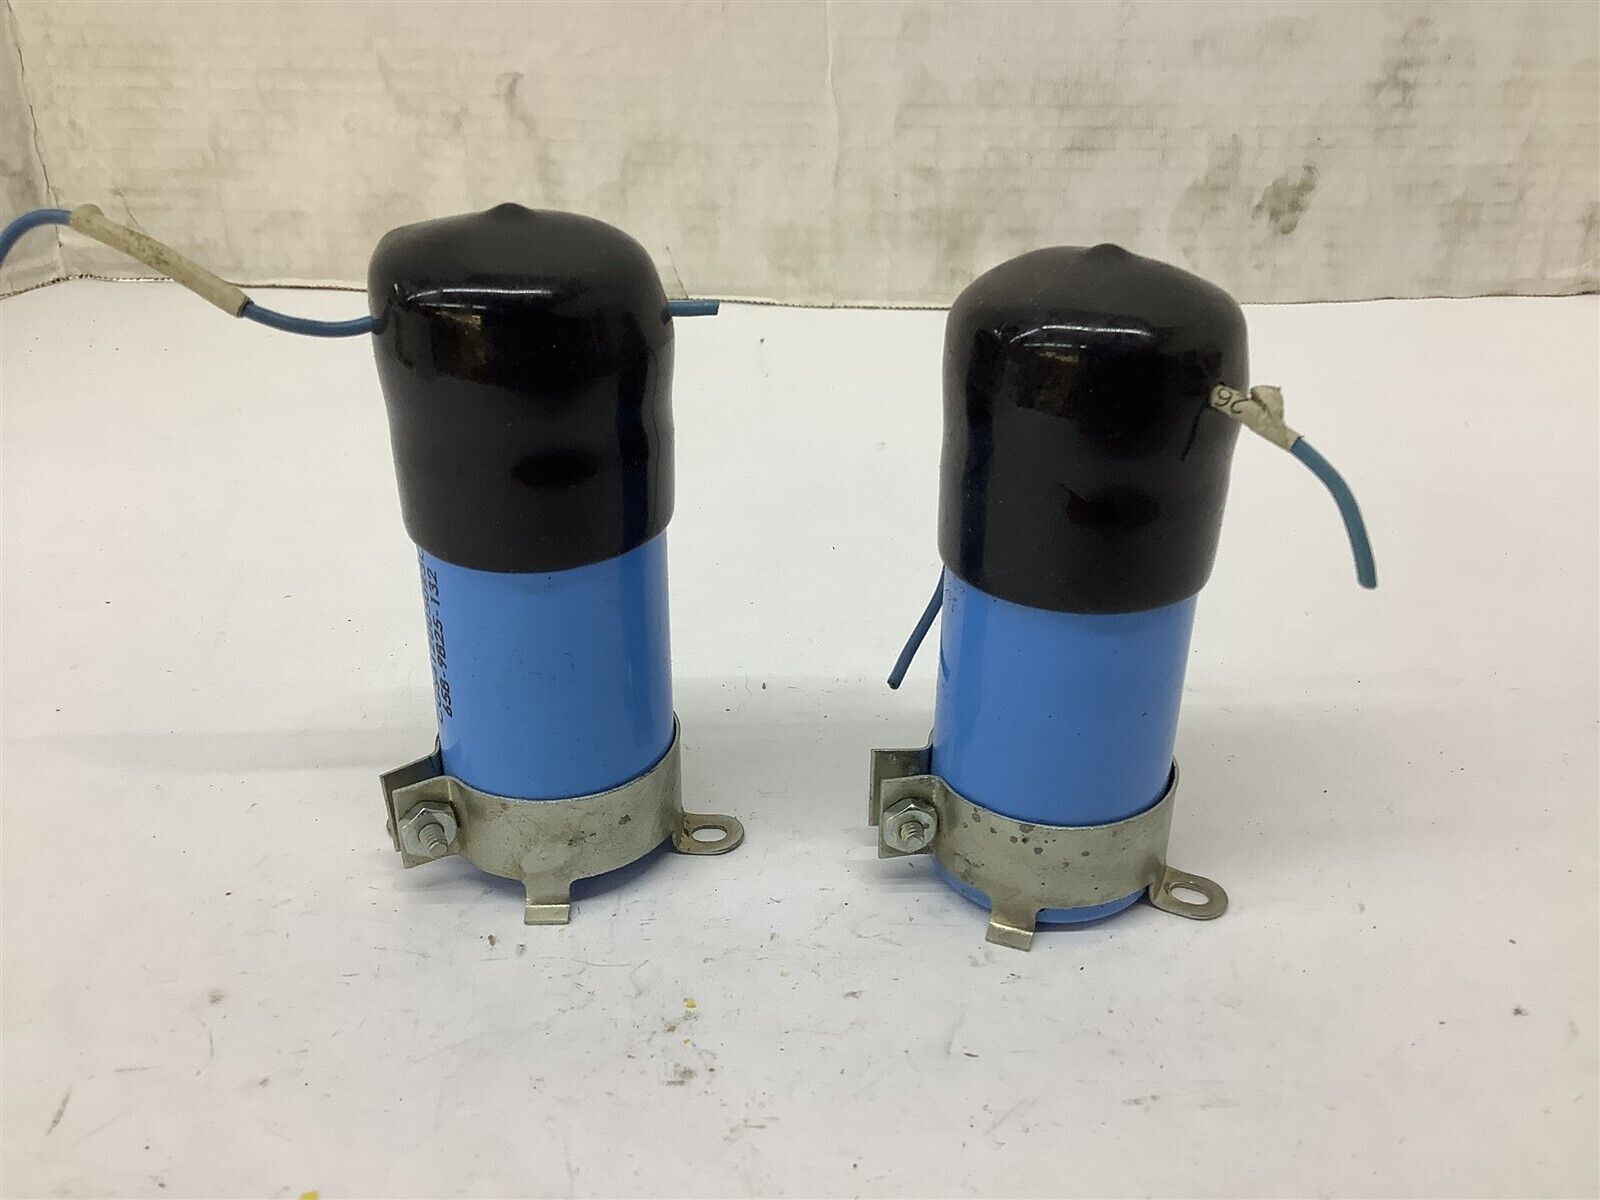 Mallory CGS Capacitor Lot Of 2 